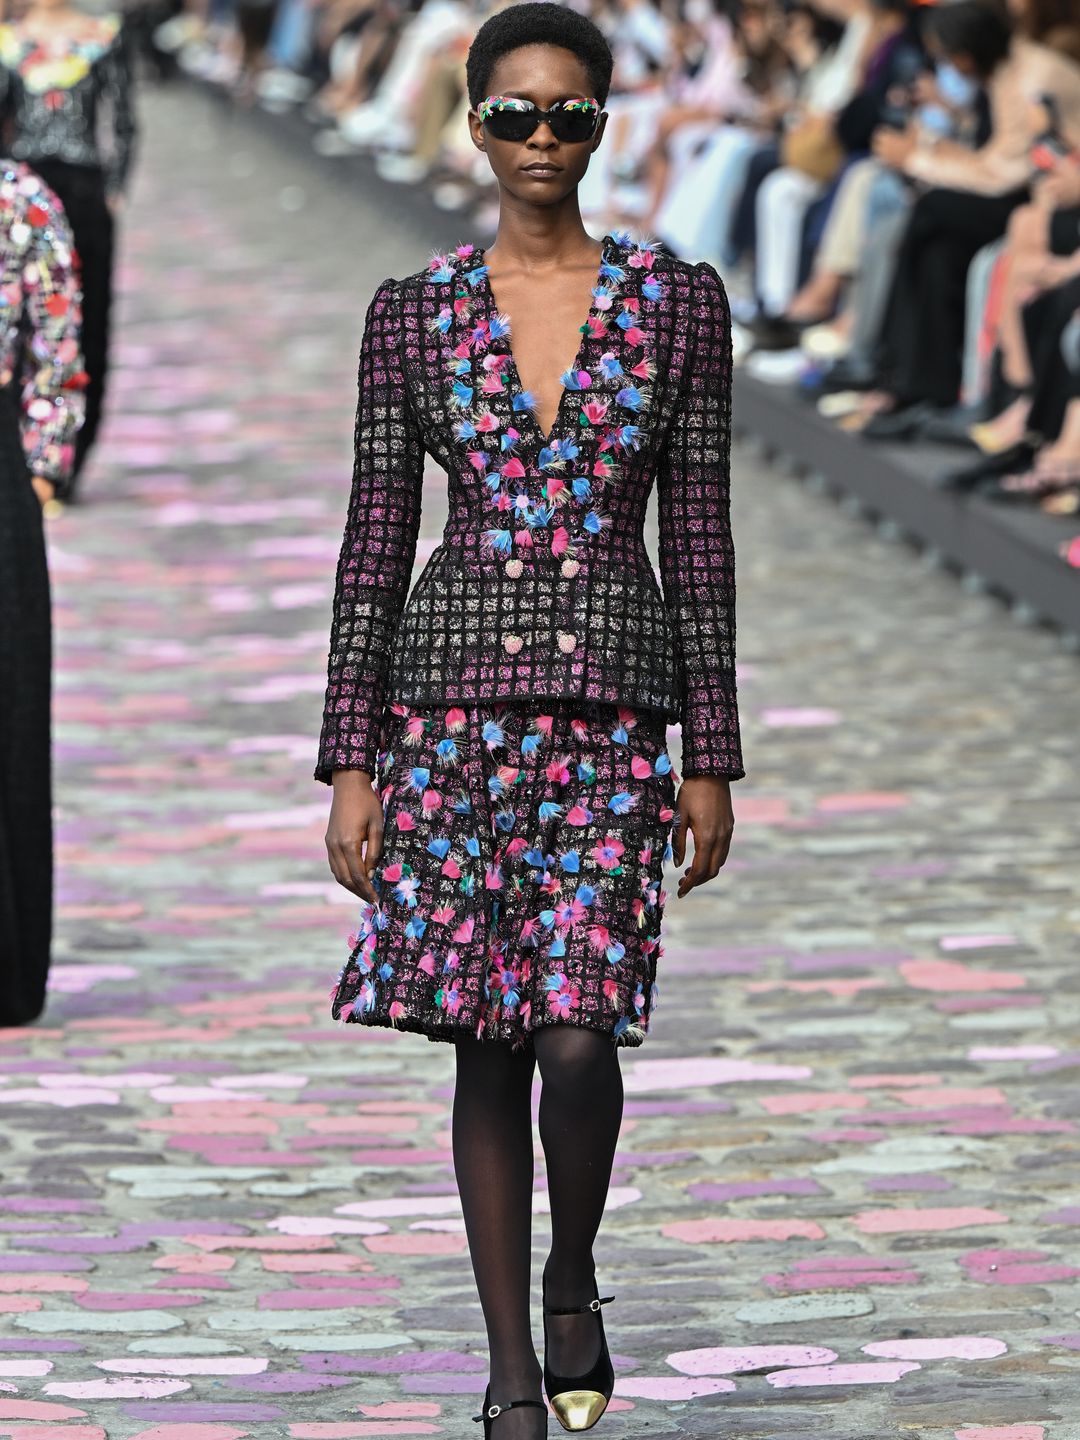 Chanel model wearing tweed jacket and skirt with blue and pink accents 